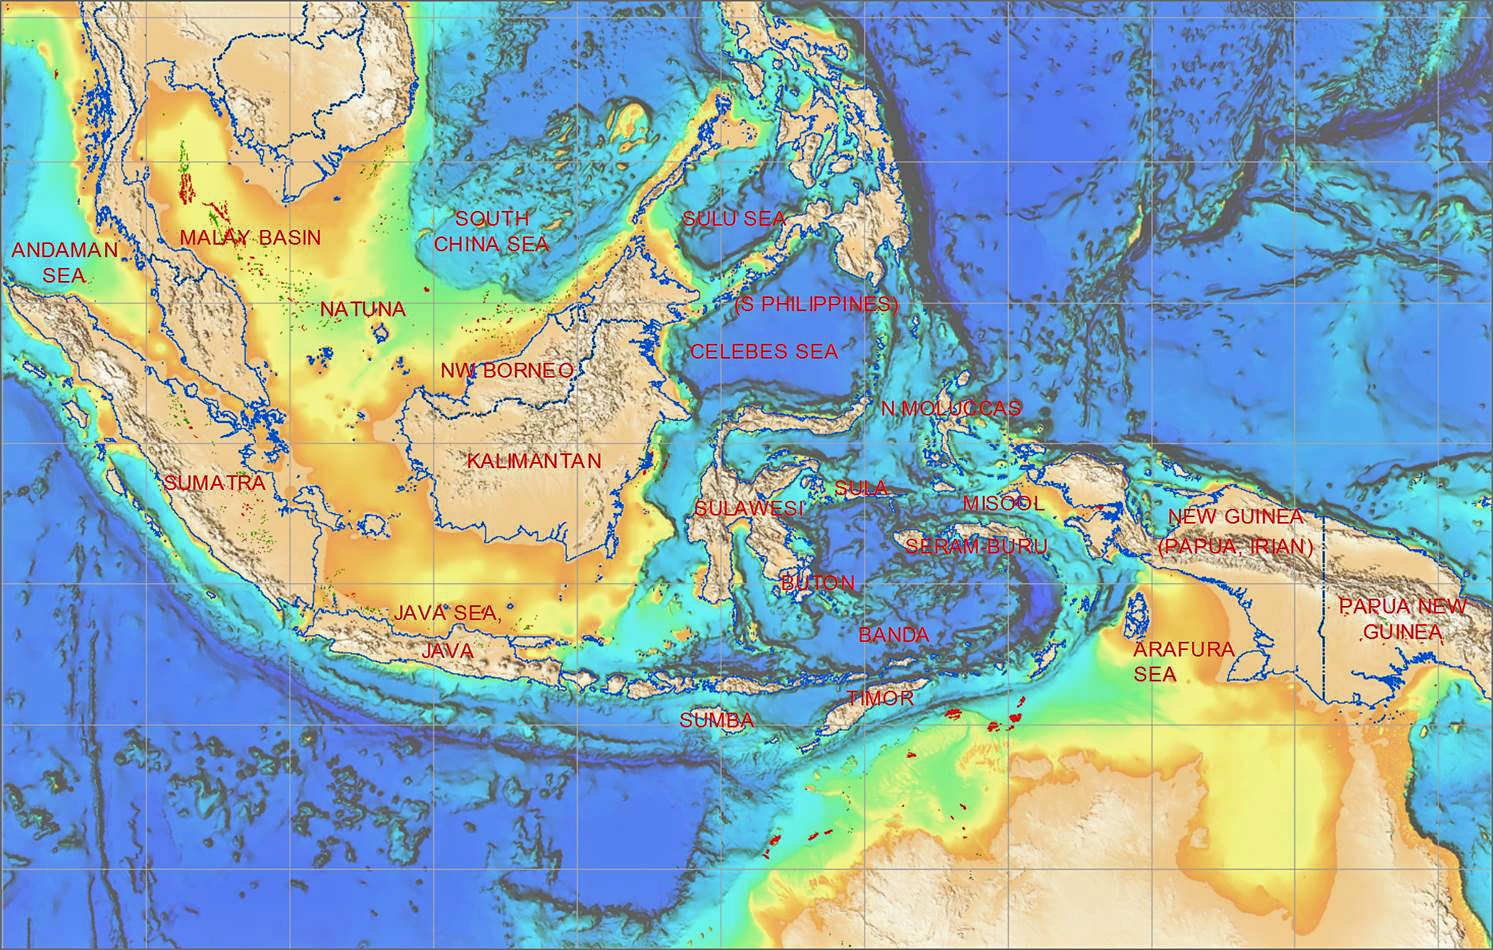 Bibliography of Indonesia Geology and Surrounding Areas